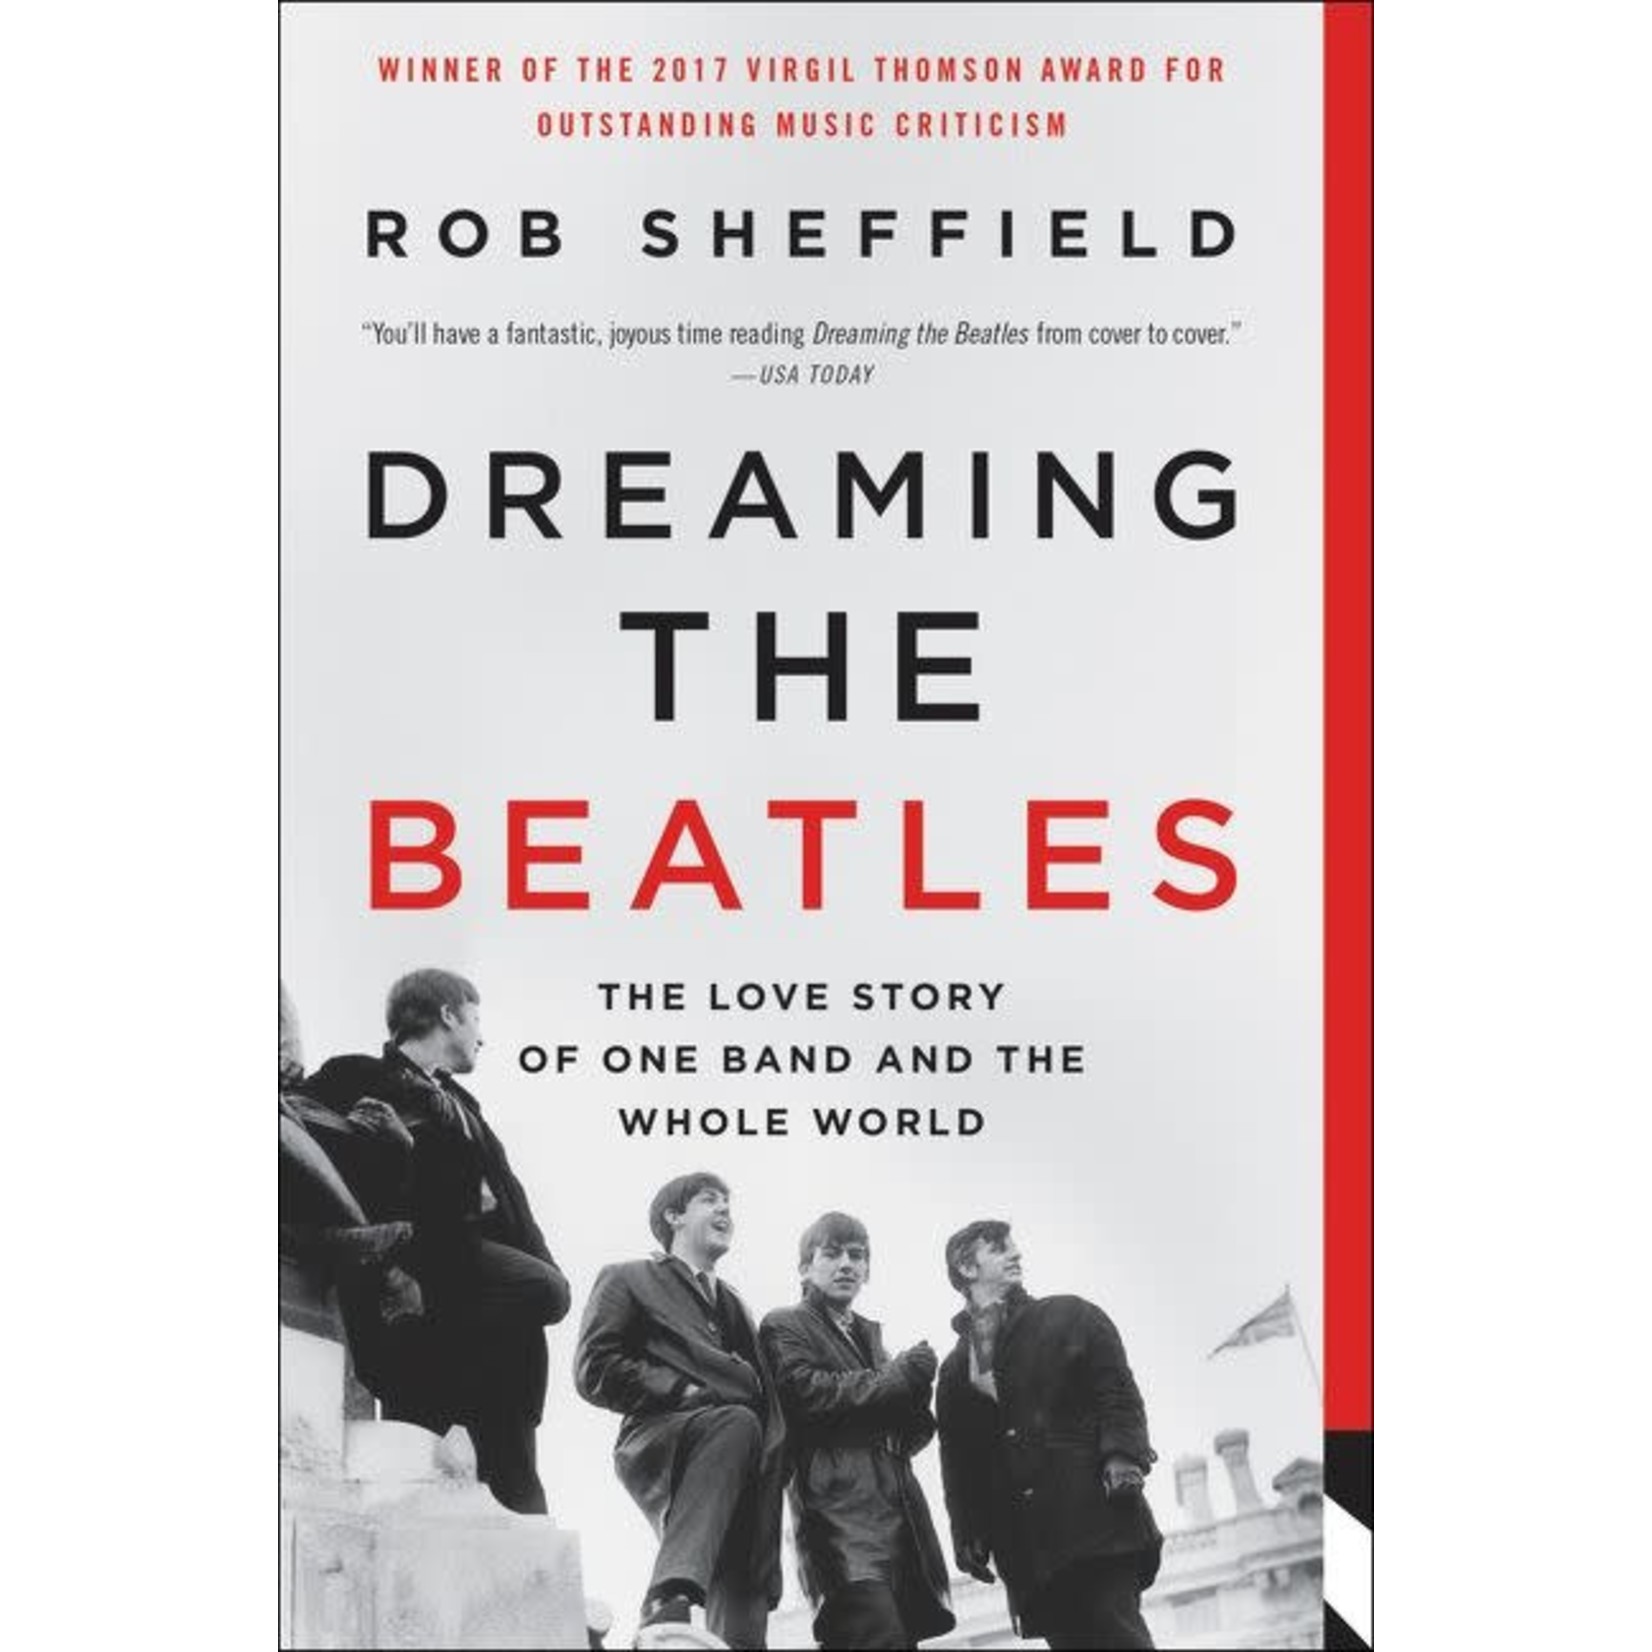 Beatles - Dreaming The Beatles: The Love Story Of One Band And The Whole World [Book]